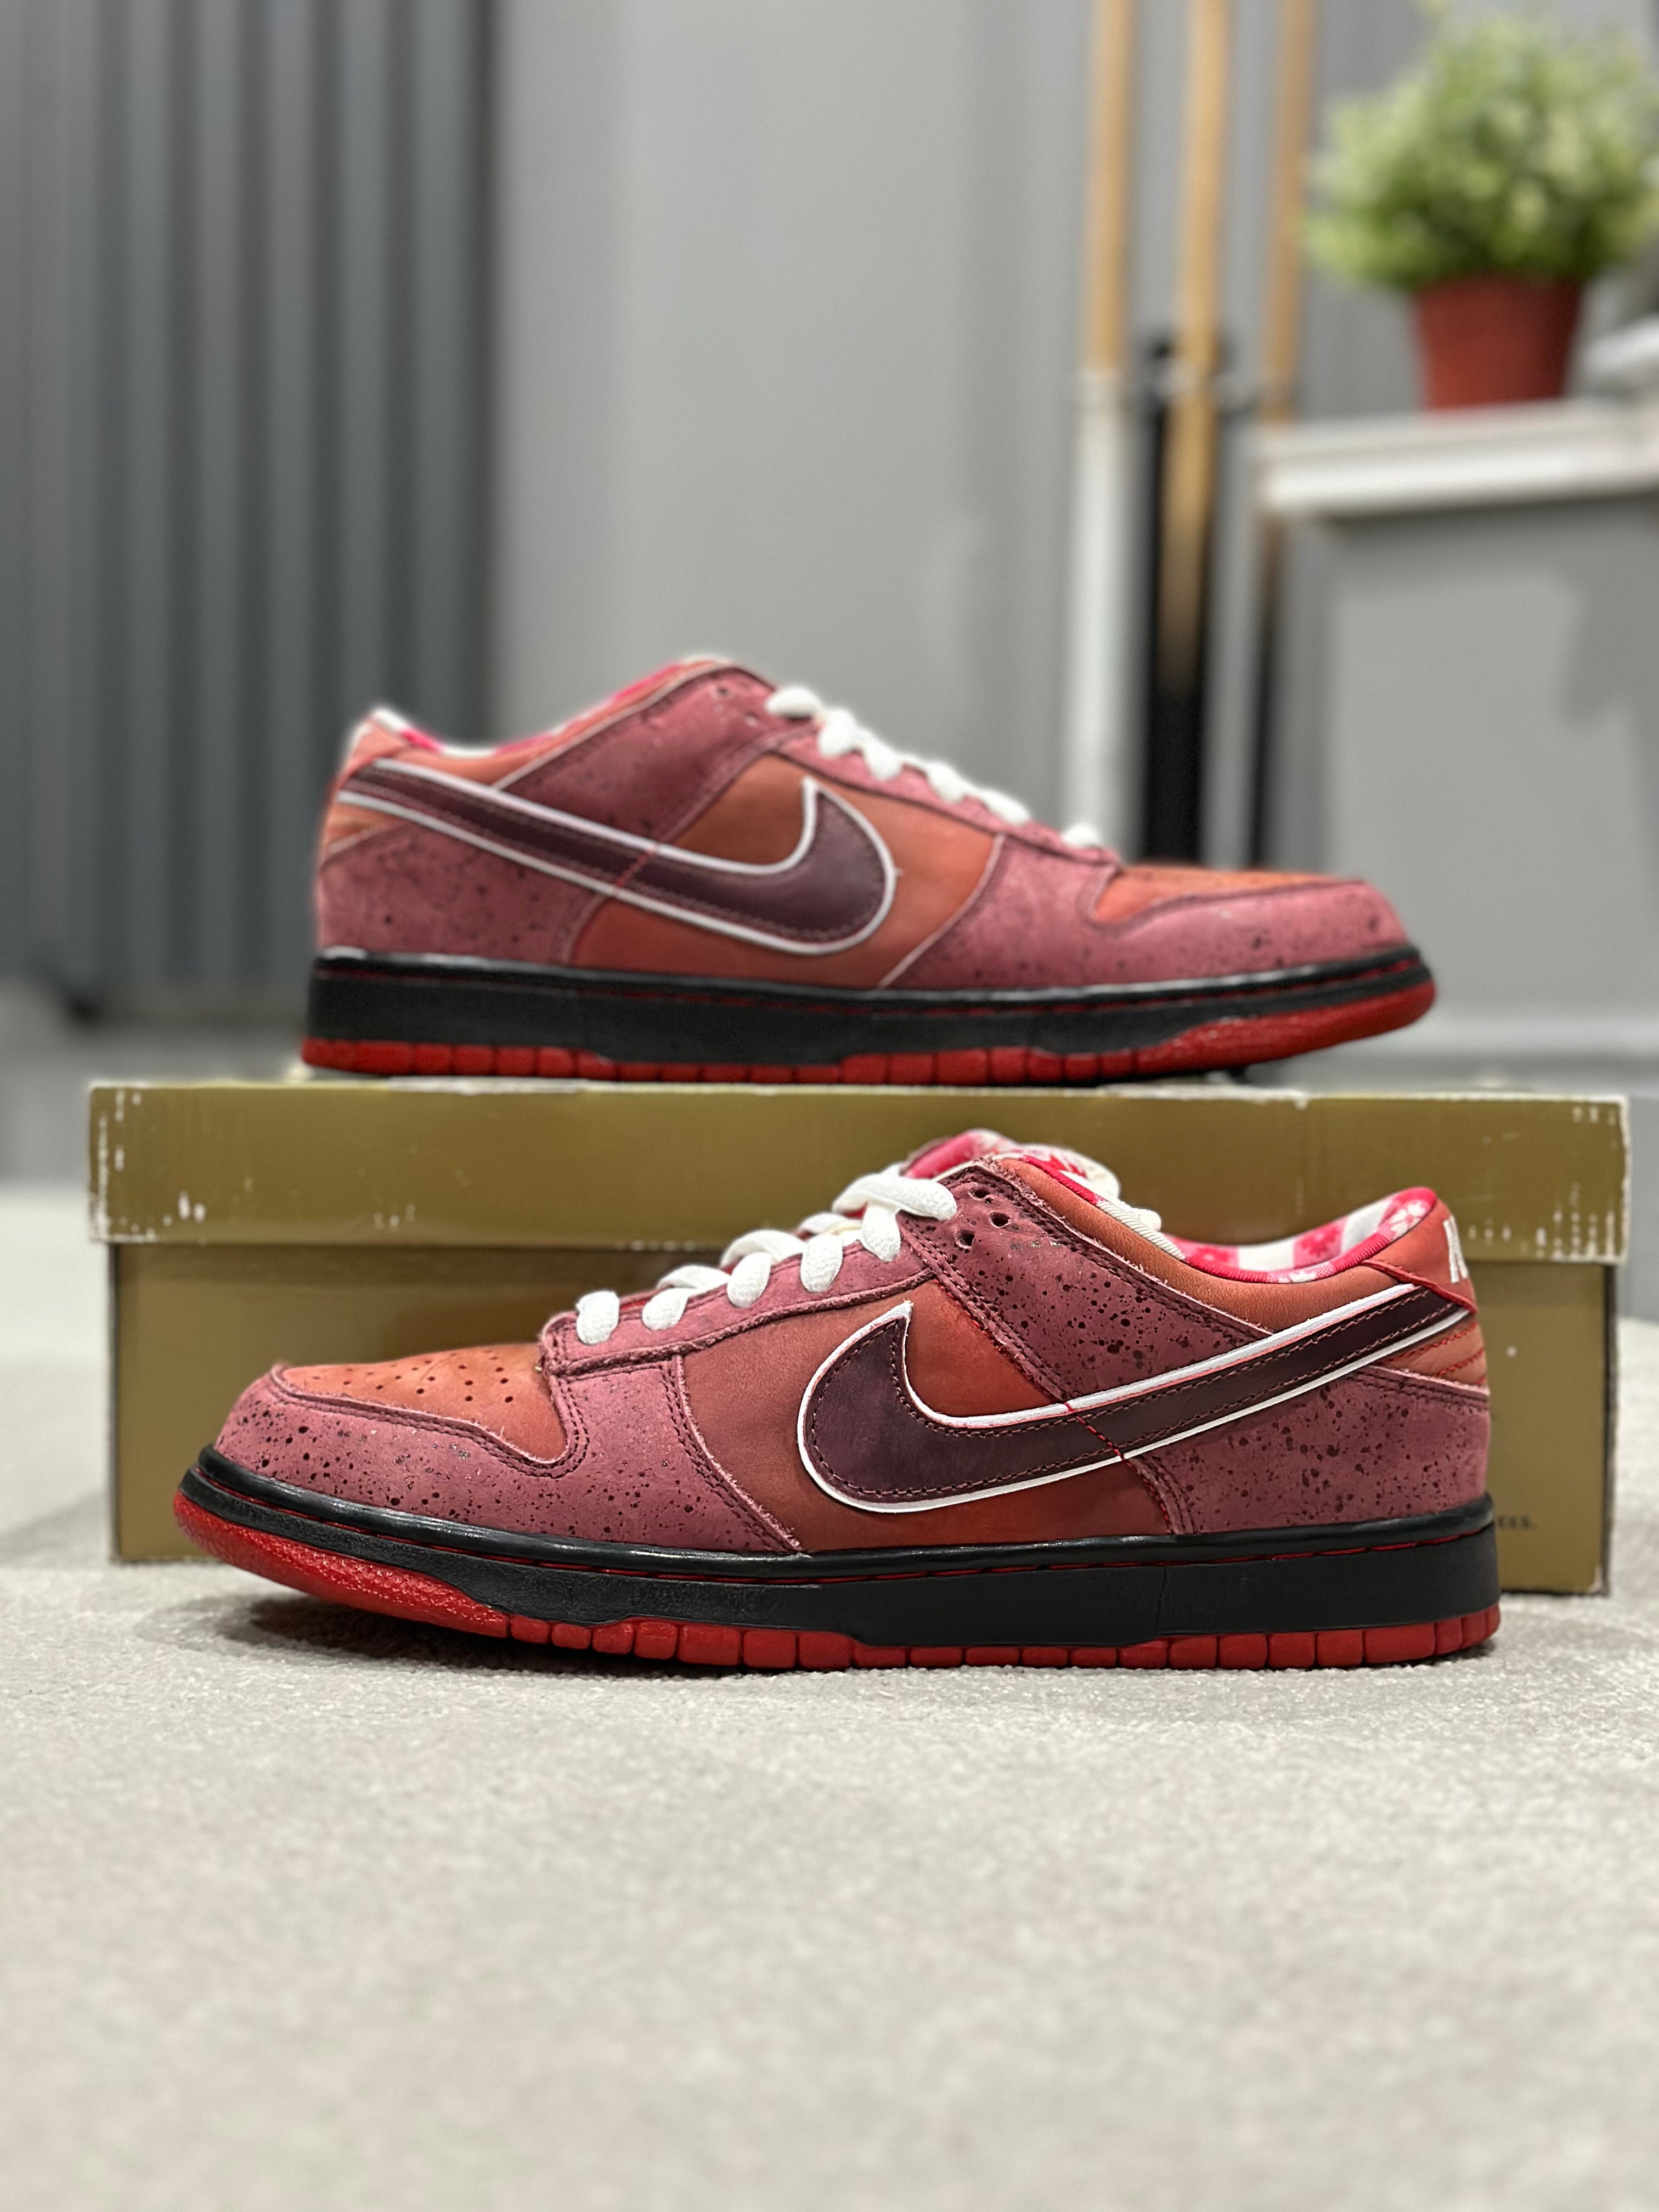 SB Dunk Low x Concepts ‘Red Lobster’ (Pre-loved) UK 8